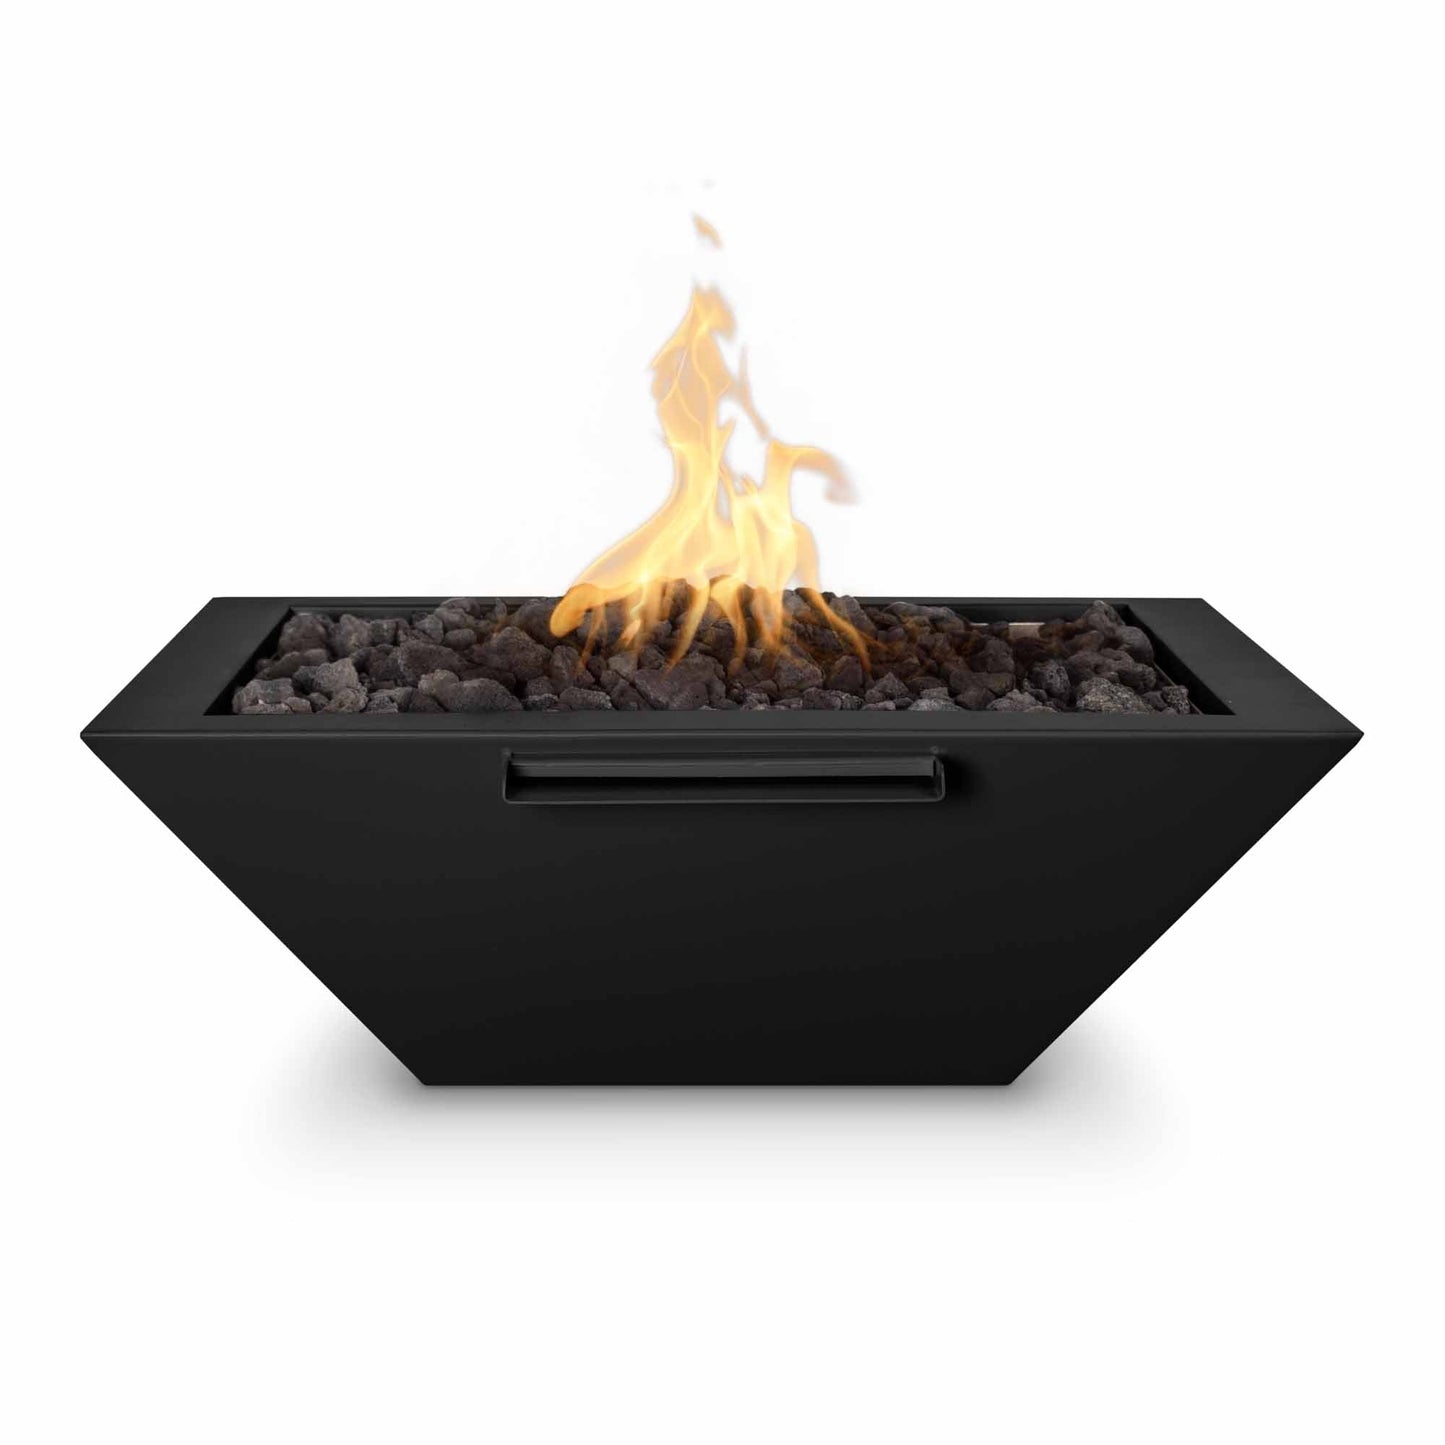 The Outdoor Plus Square Maya 24" Gray Powder Coated Metal Natural Gas Fire & Water Bowl with Match Lit with Flame Sense Ignition